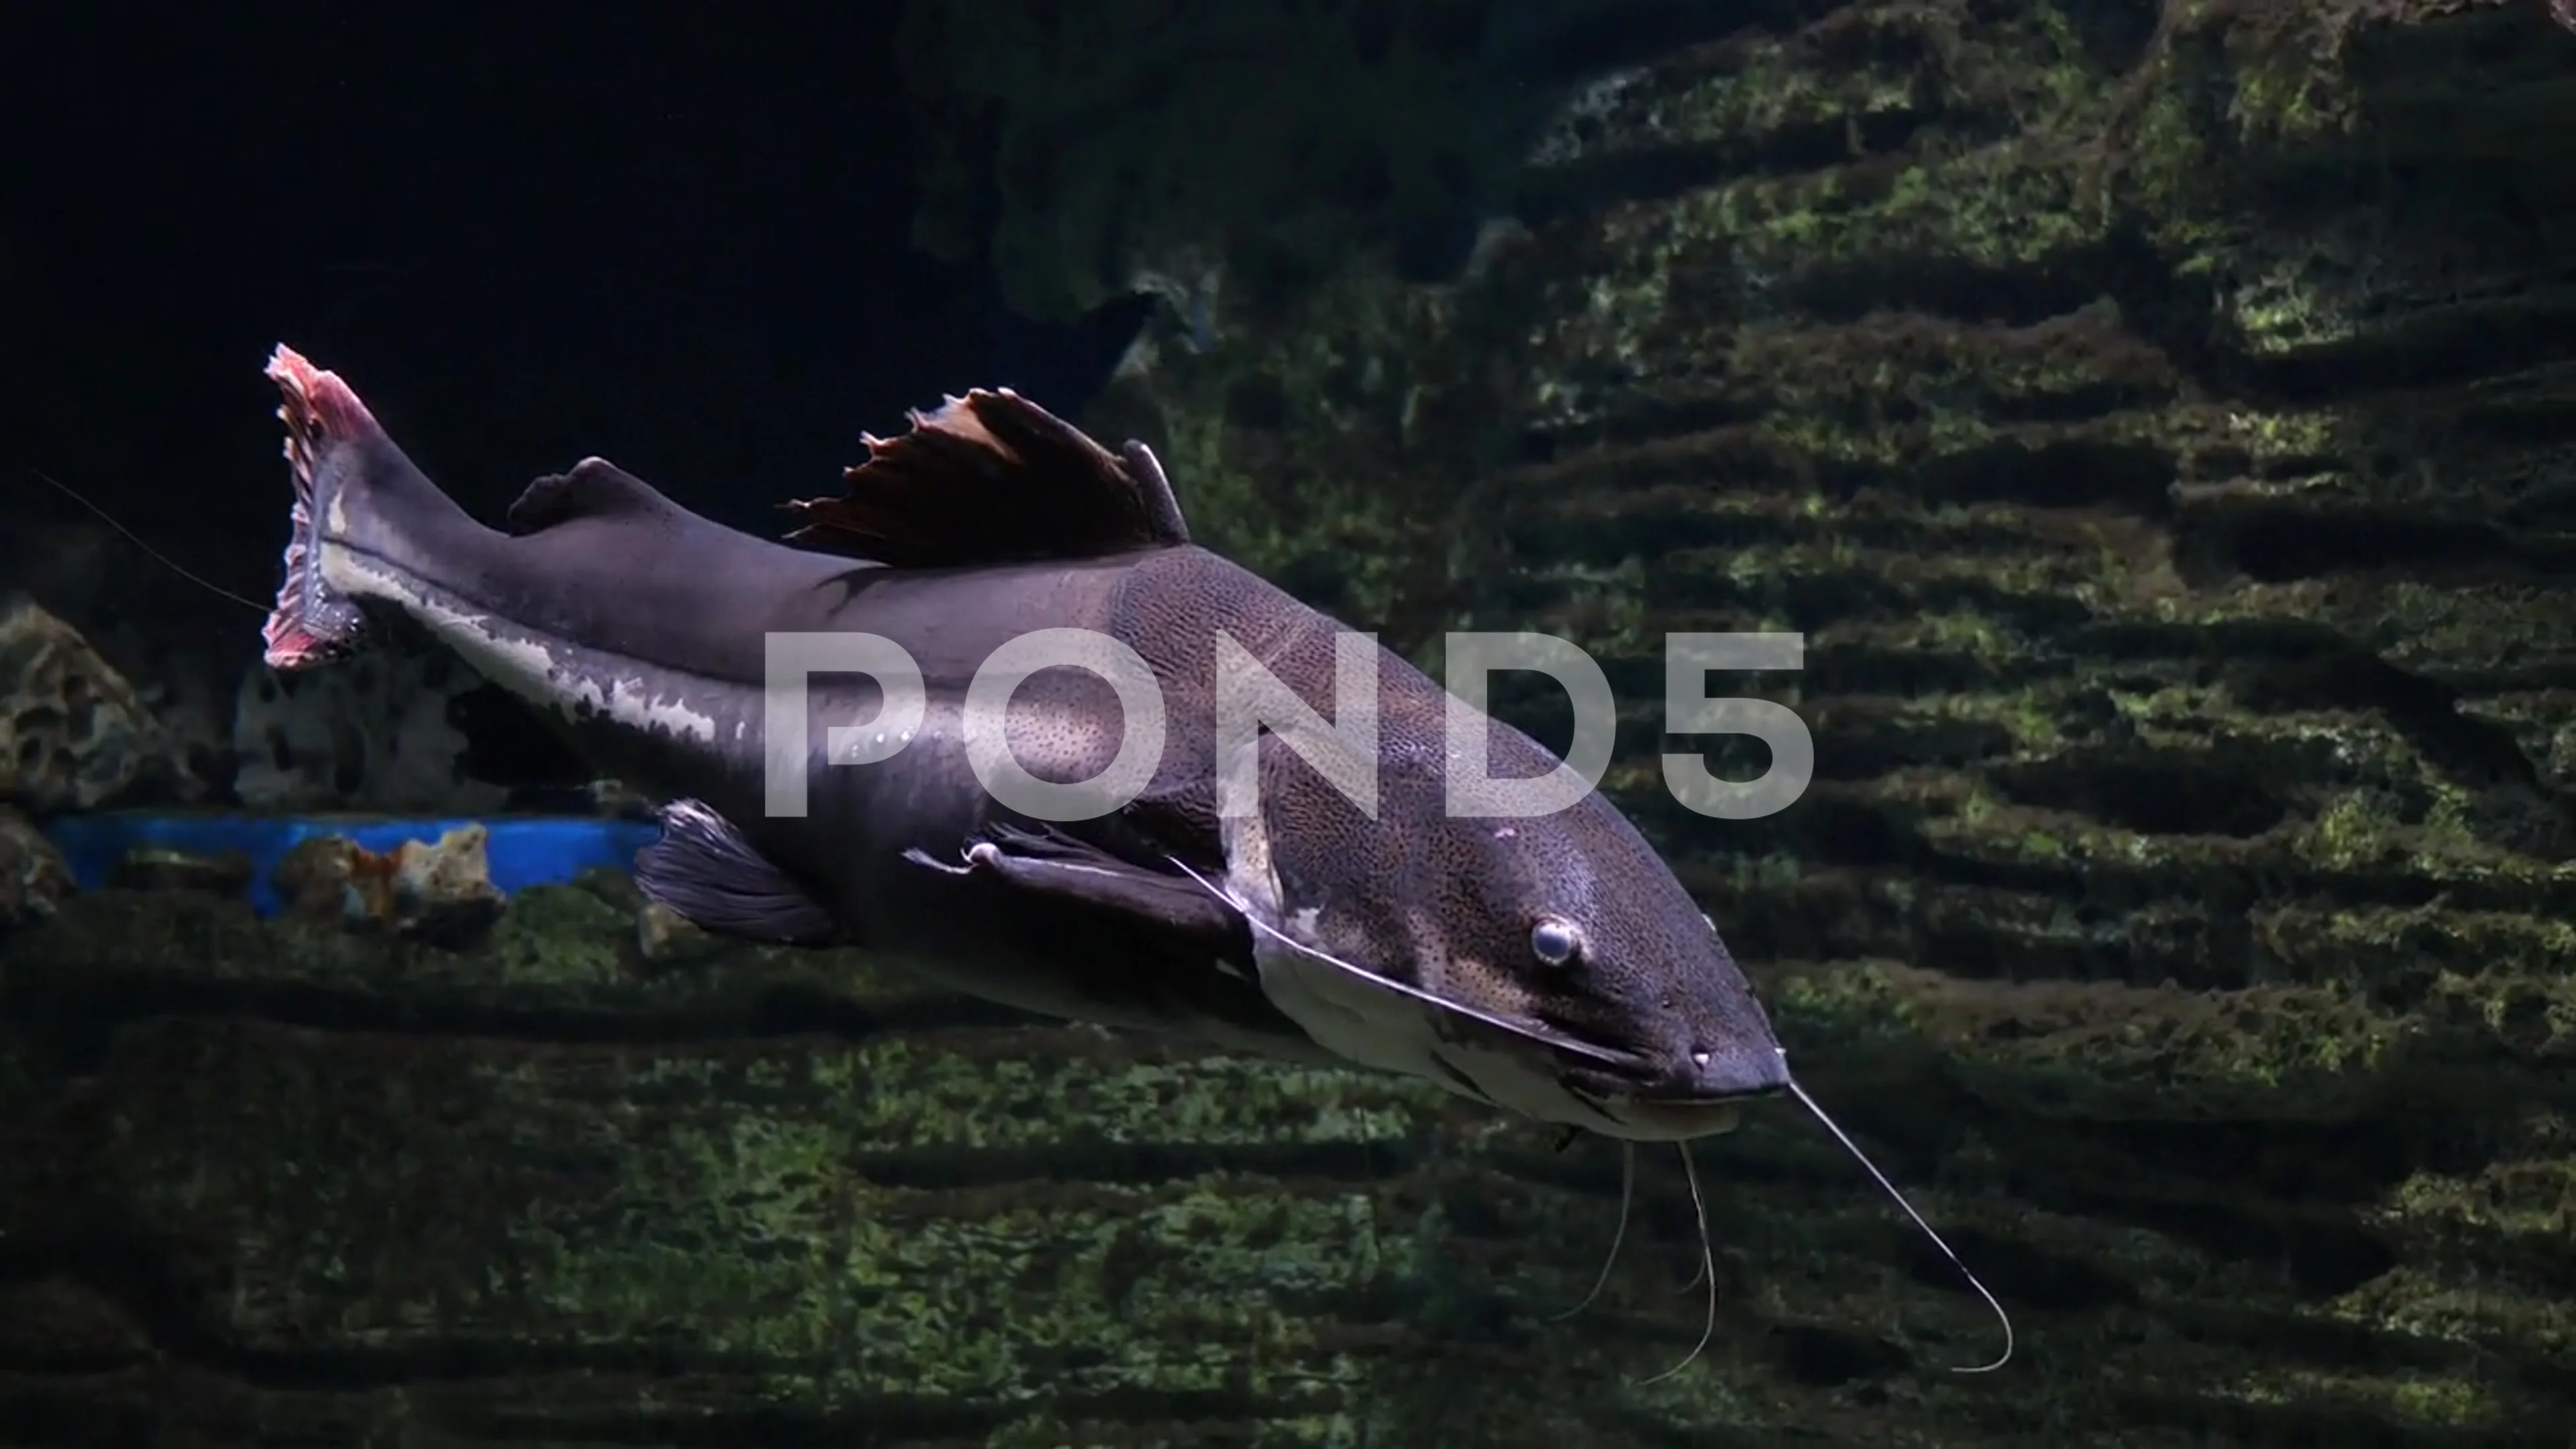 Red Tailed Catfish swimming in water -- Phractocephalus